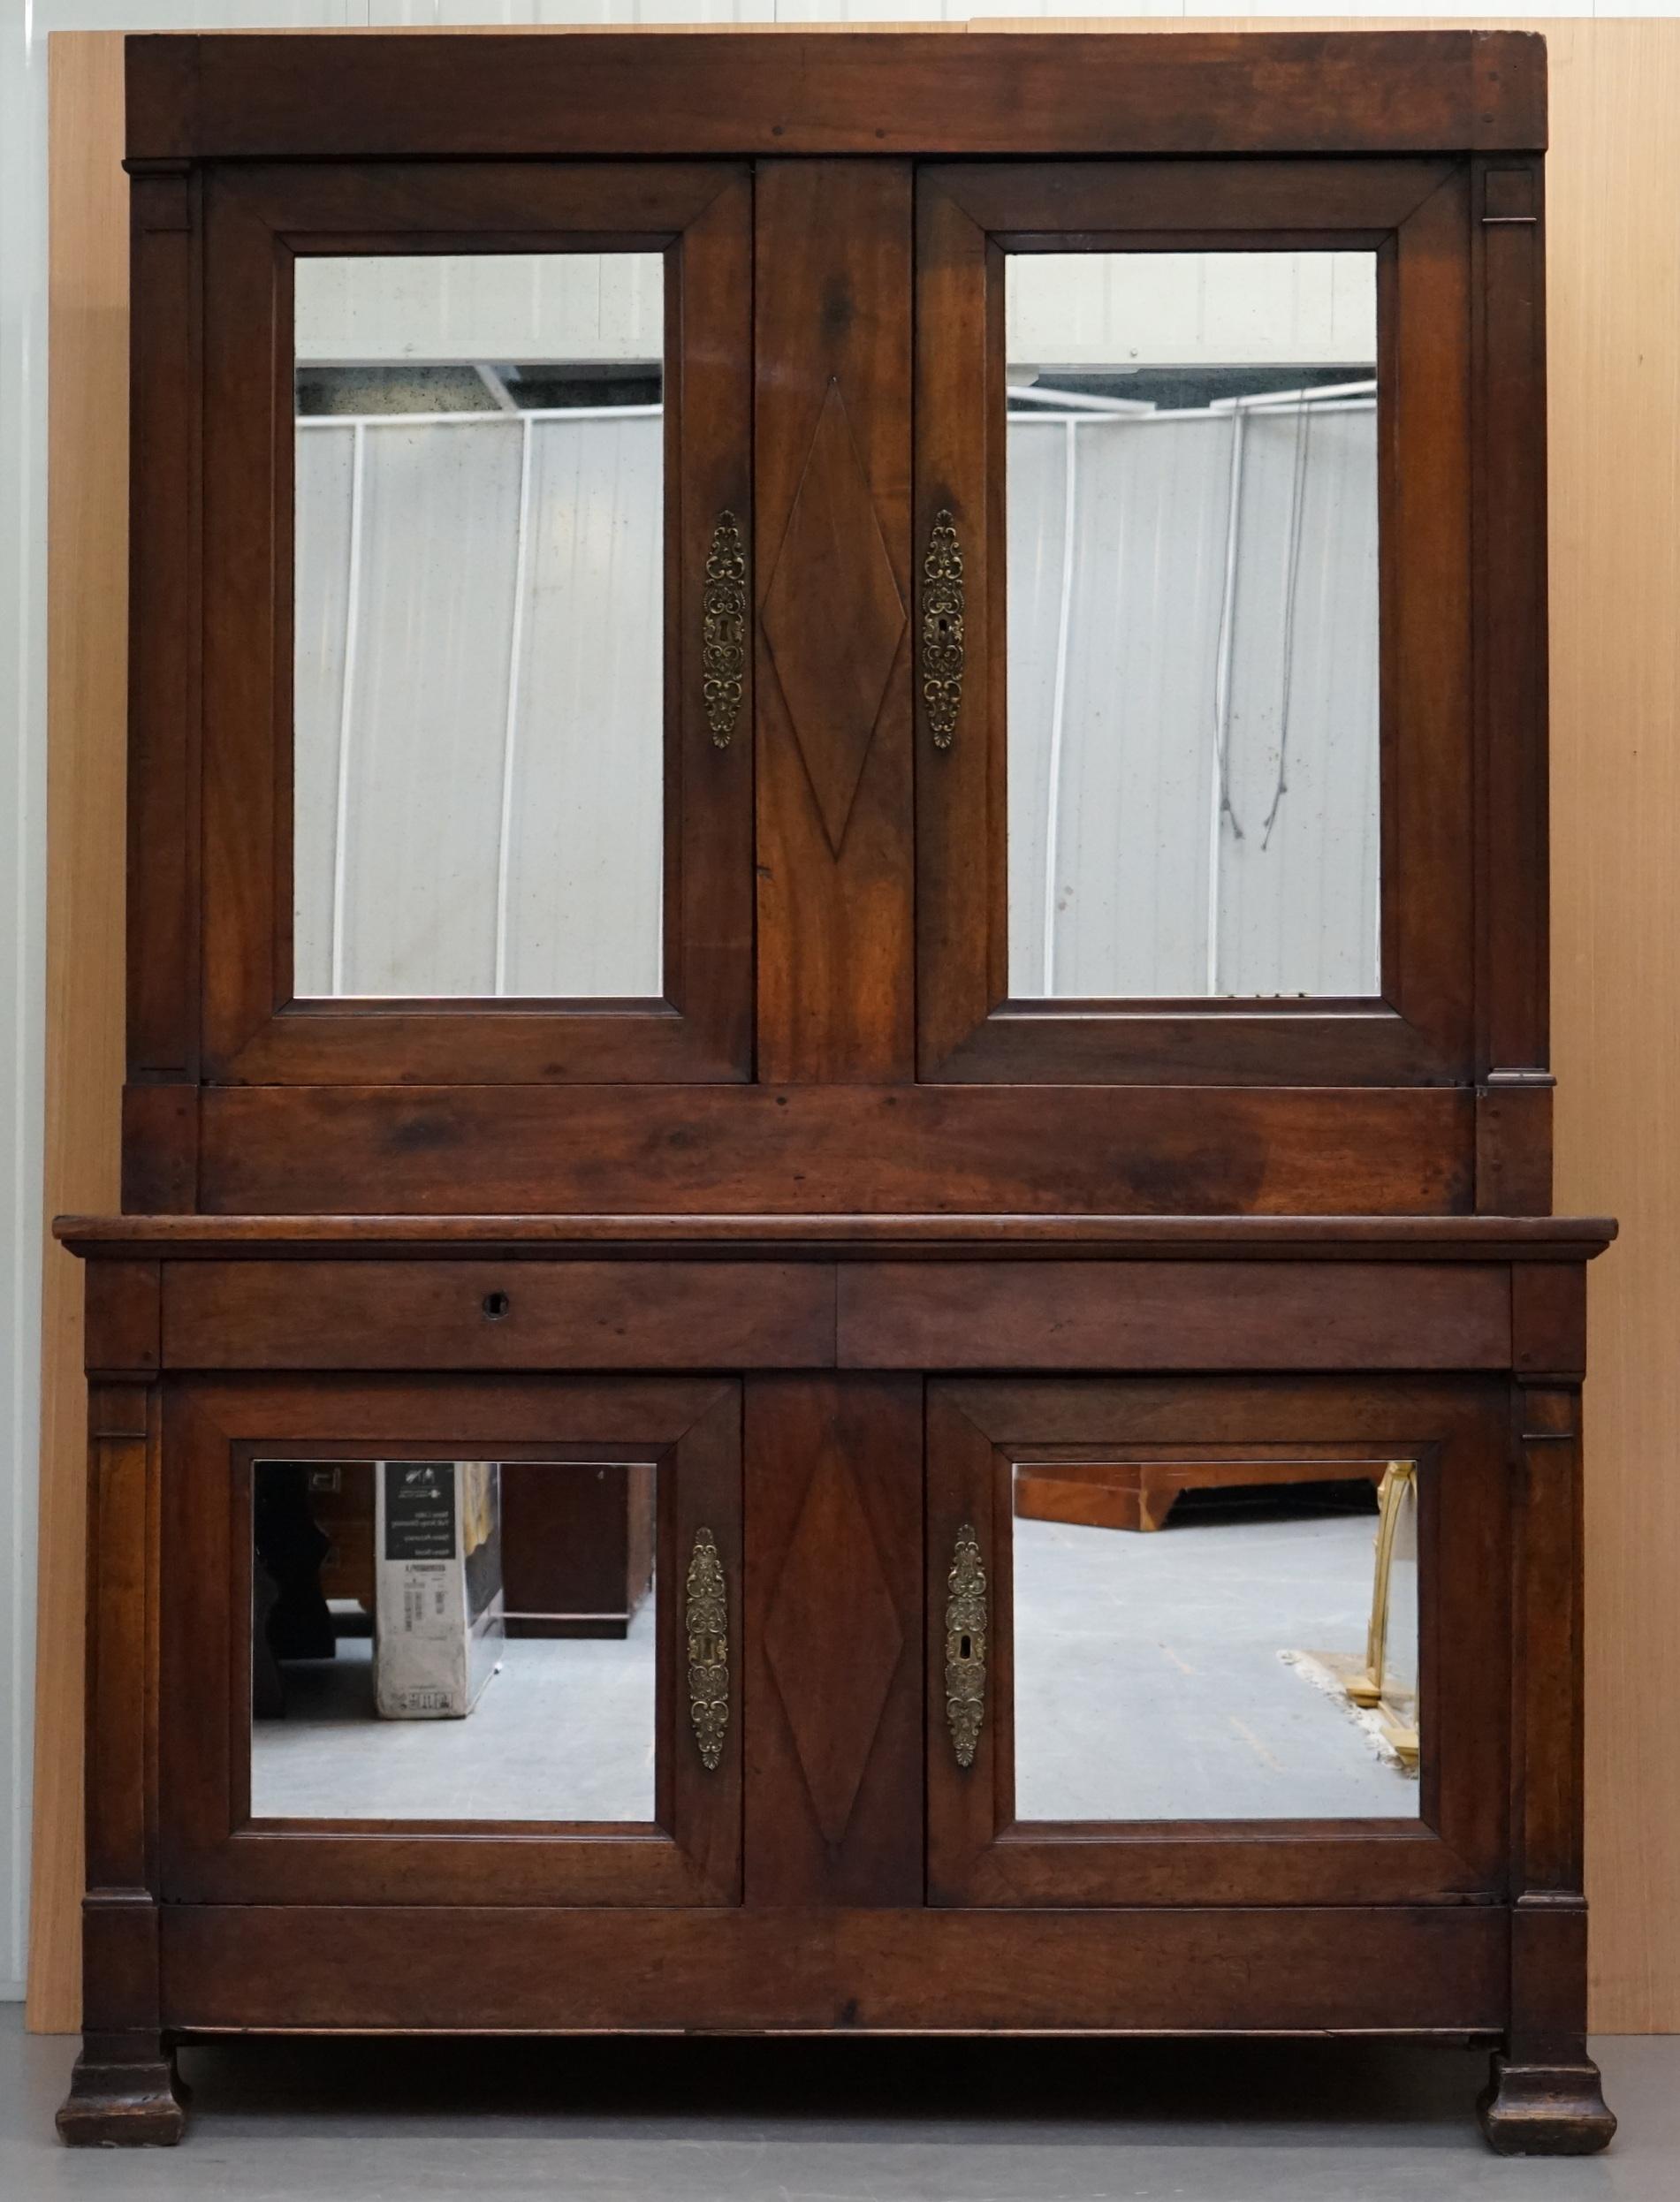 We are delighted to offer for sale this stunning monumental 18th century solid hand carved wood house keeper’s cupboard with panelled mirrors all-over

This really is a substantial piece of furniture, its handcut from huge slabs of solid timber,